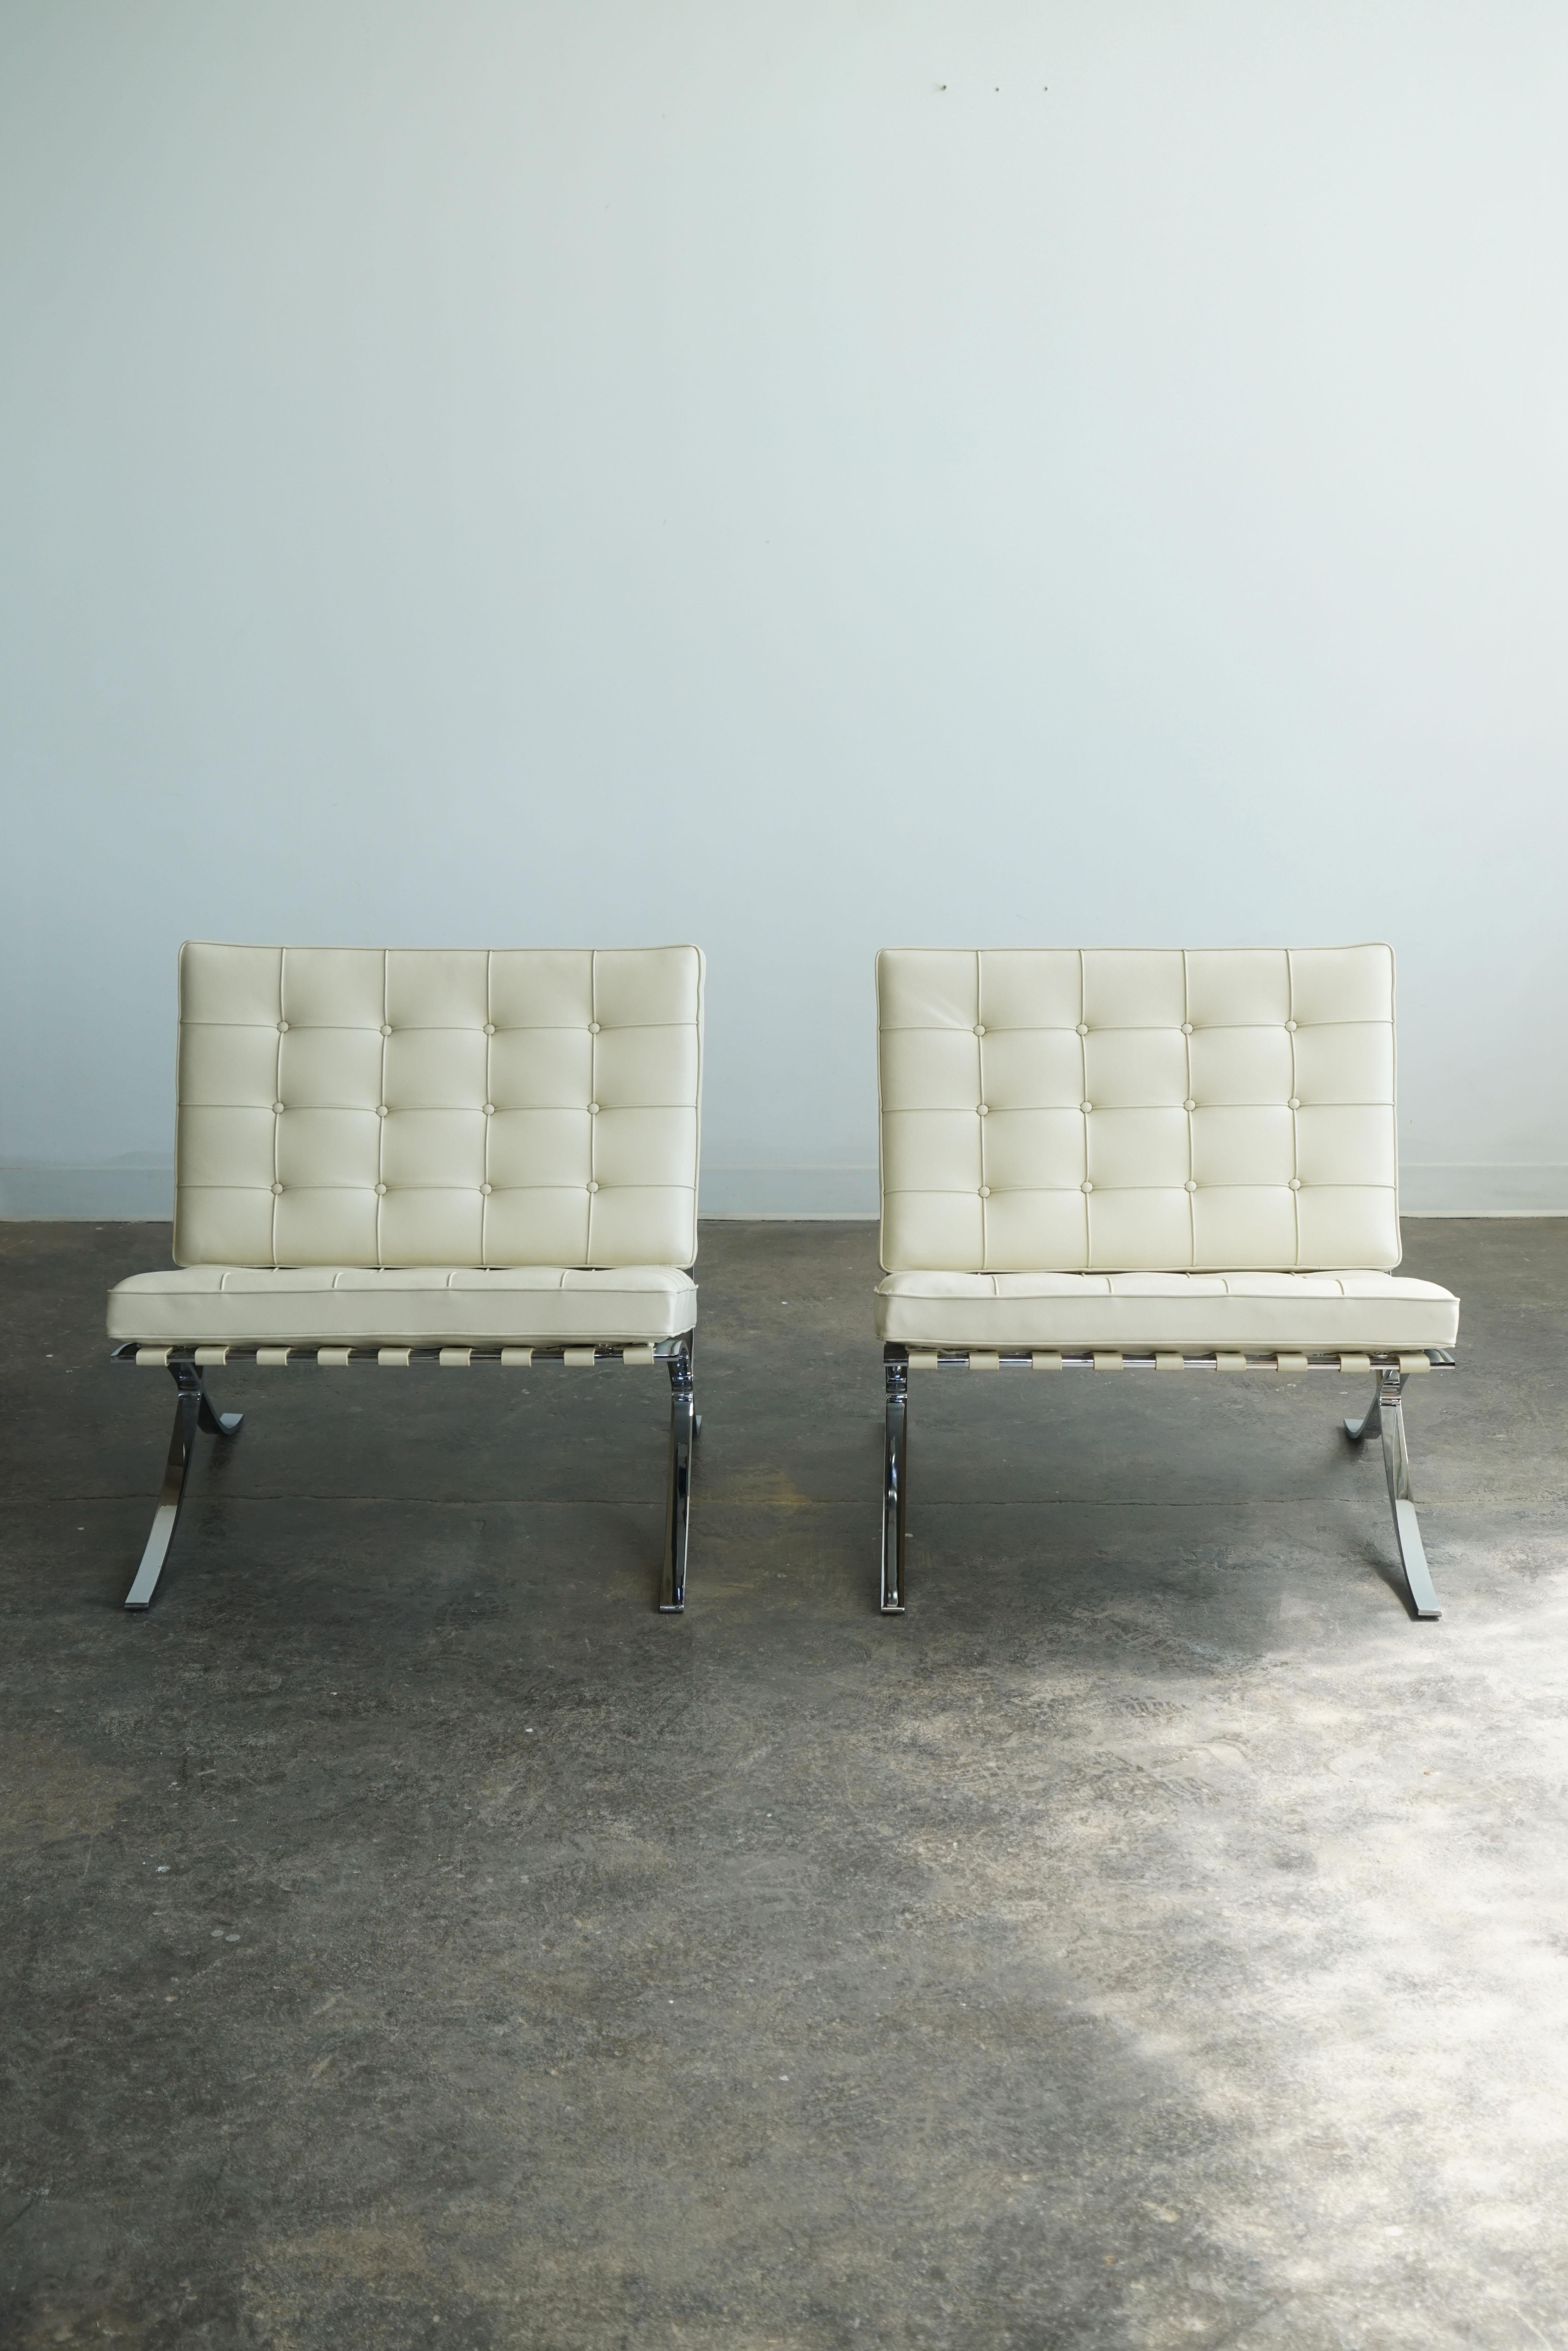 Knoll Barcelona Chairs, set of 2.
Designed by Mies van der Rohe, originally in 1929.  
Volo 